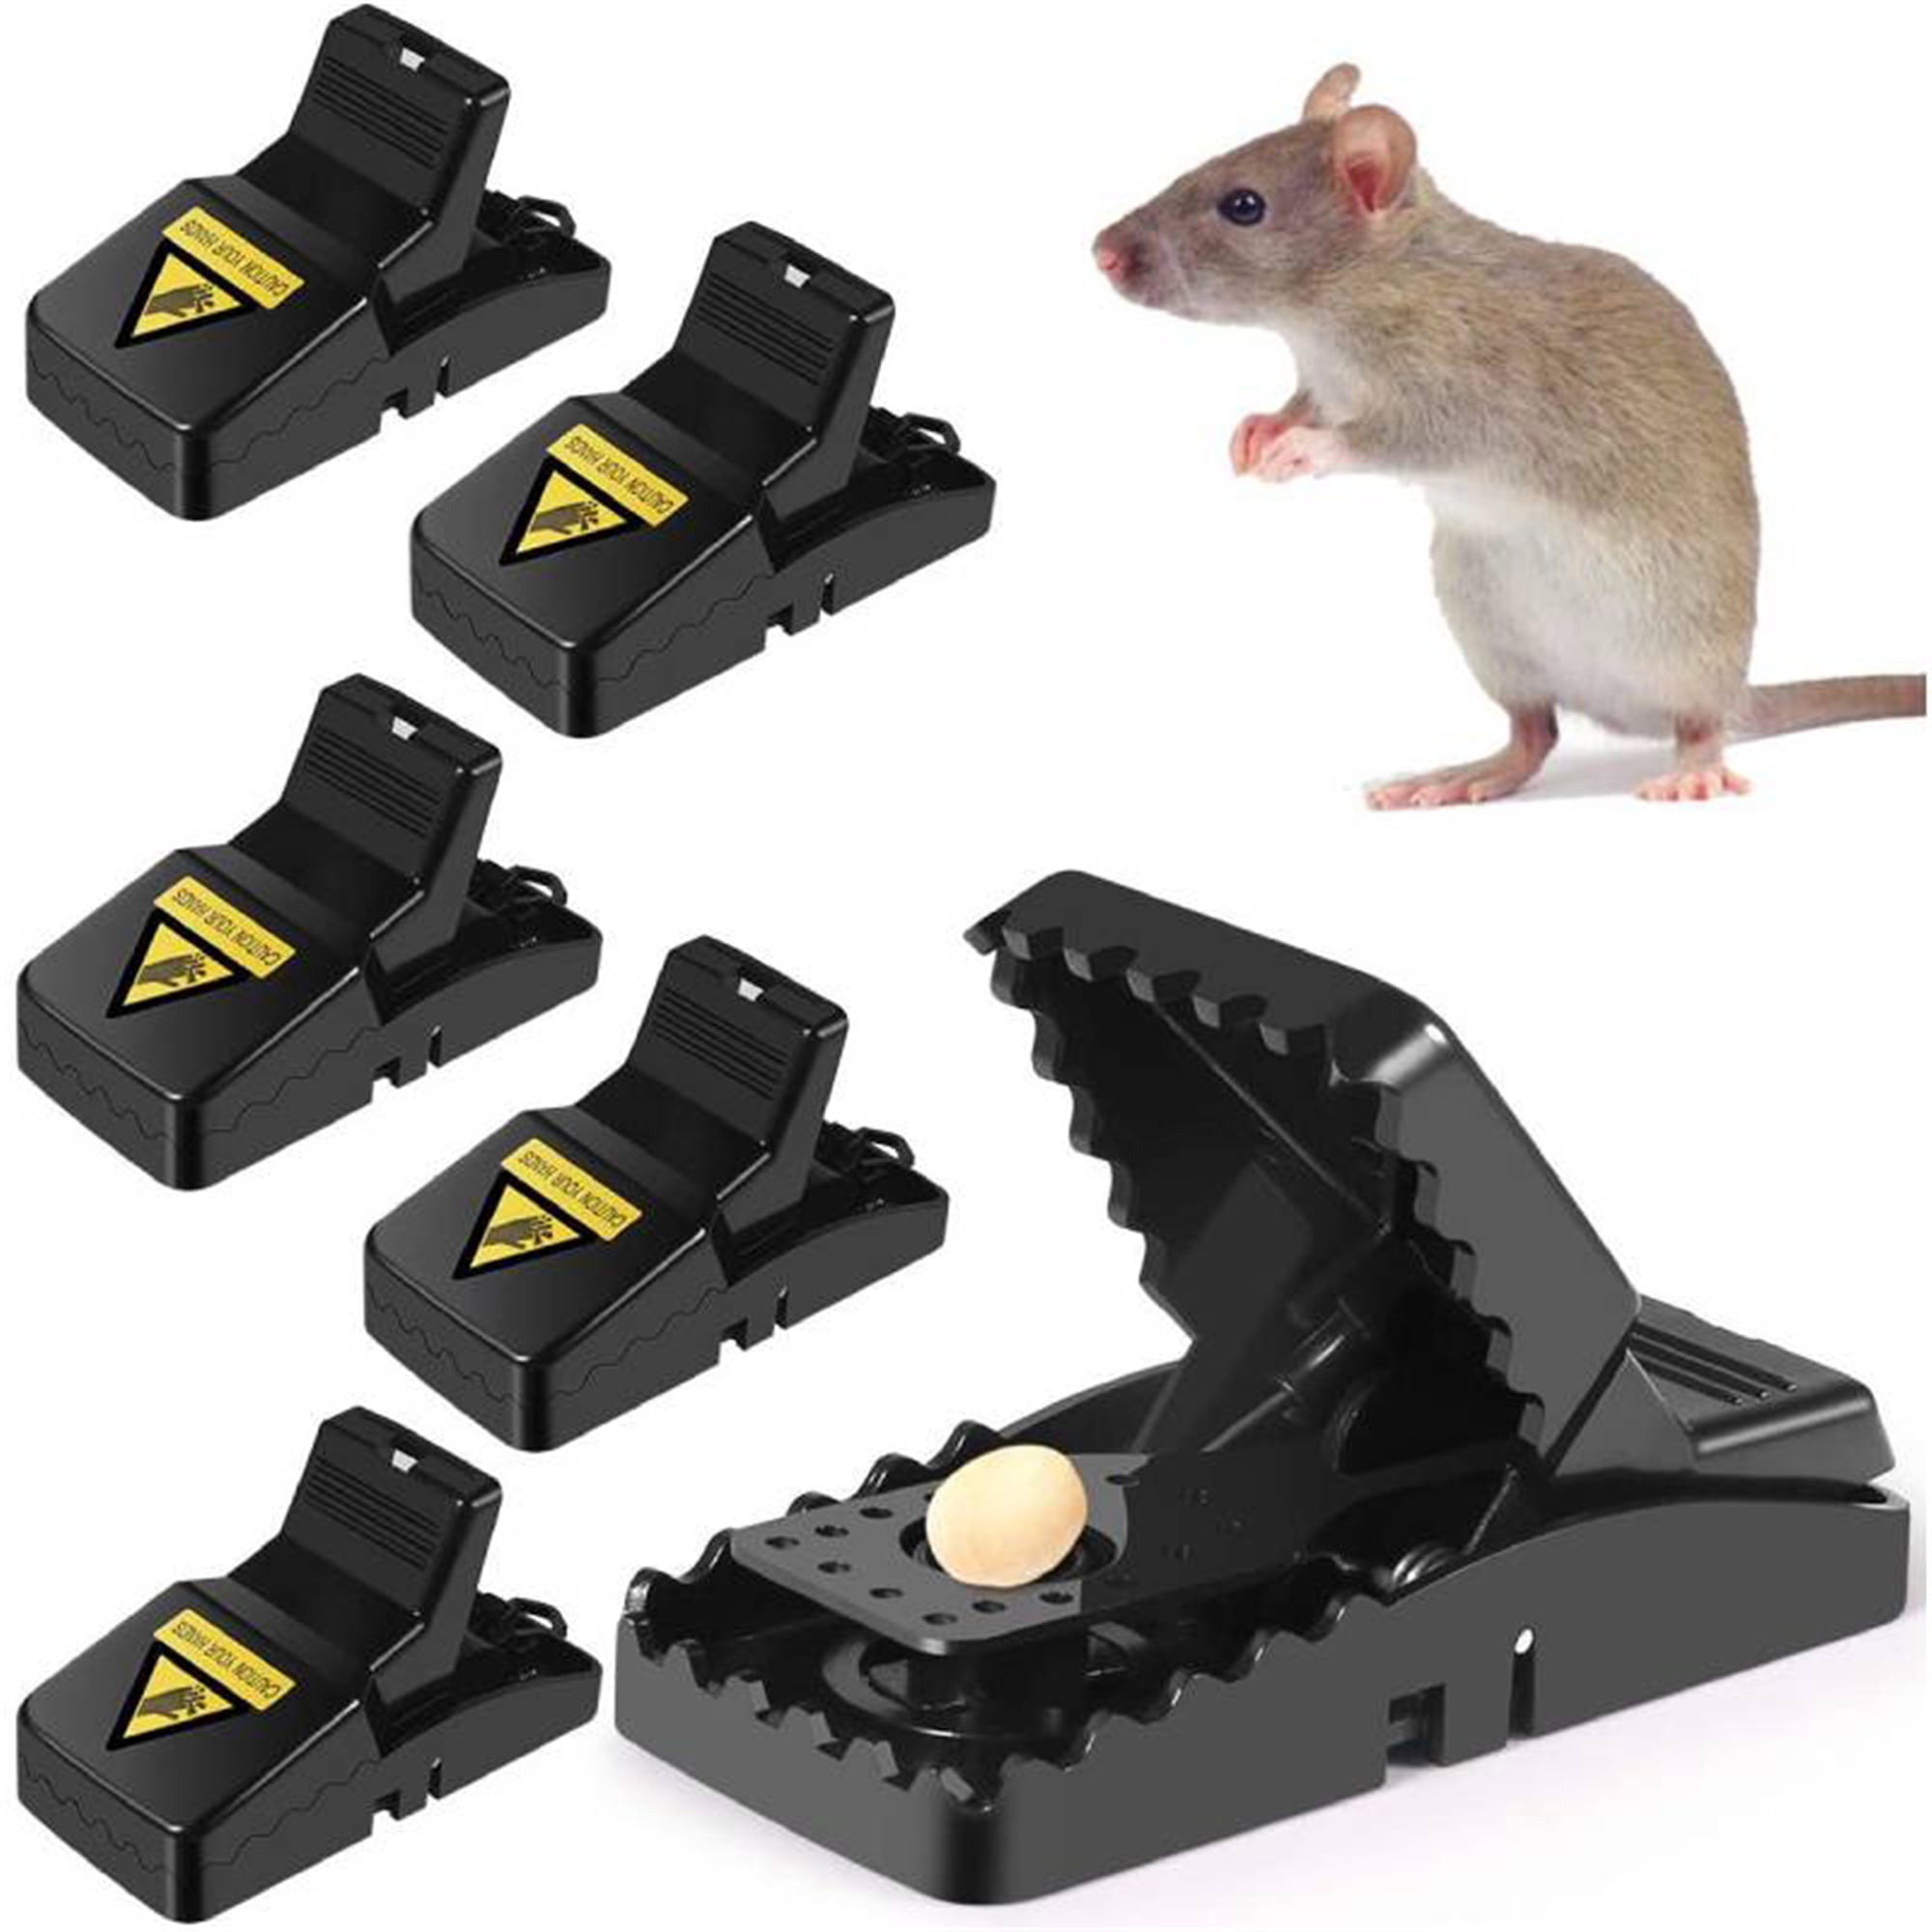  SZHLUX 4 Pack Mouse Traps, Mouse Traps Indoor for Home, Small Mice  Trap and Reusable Mouse Trap (Large), Black : Patio, Lawn & Garden